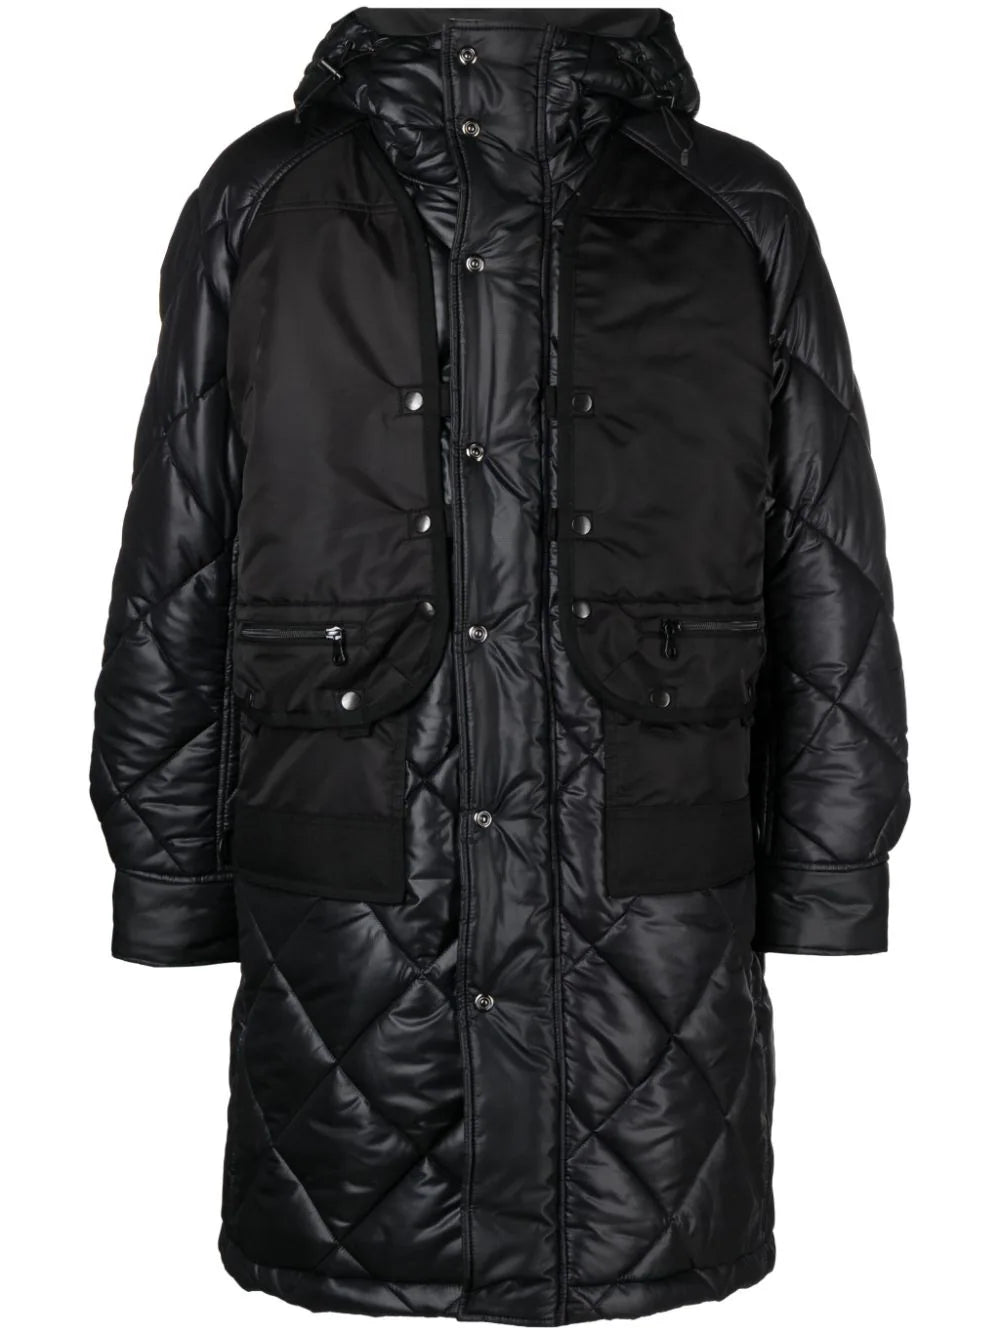 X INNERRAUM HOODED QUILTED JACKET